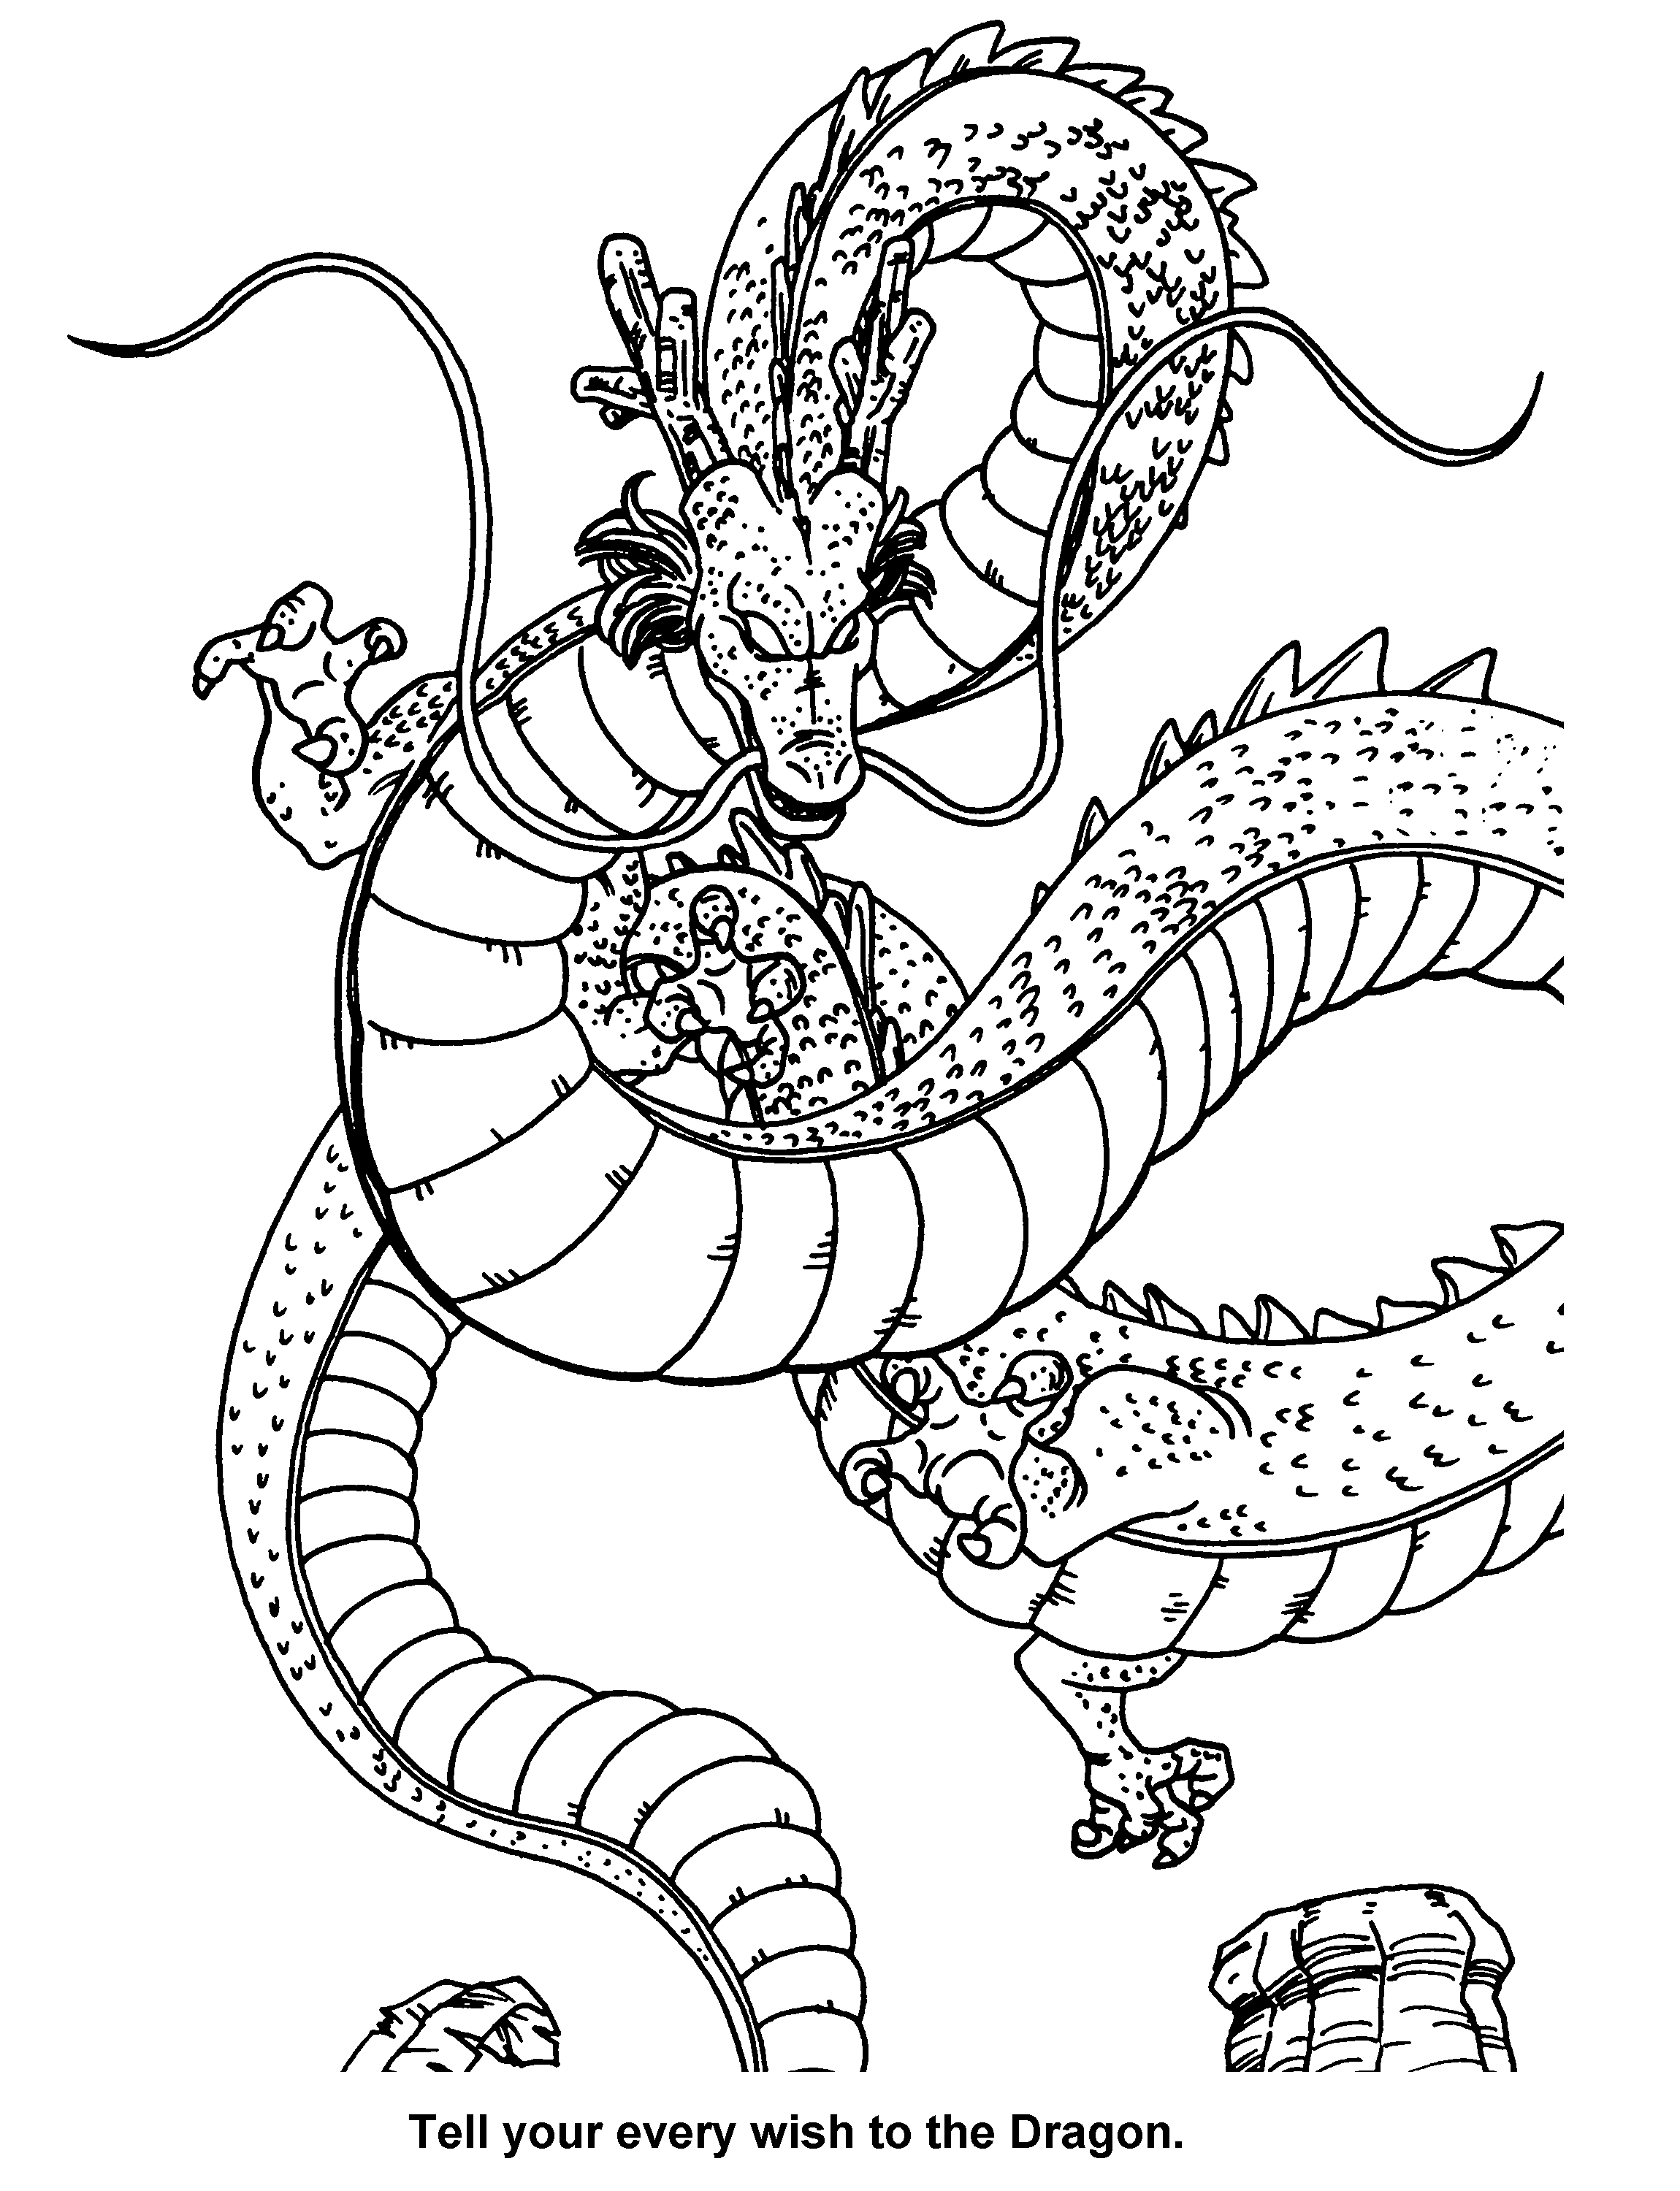 Shen Long | Dragon coloring page, Super coloring pages, Dragon drawing